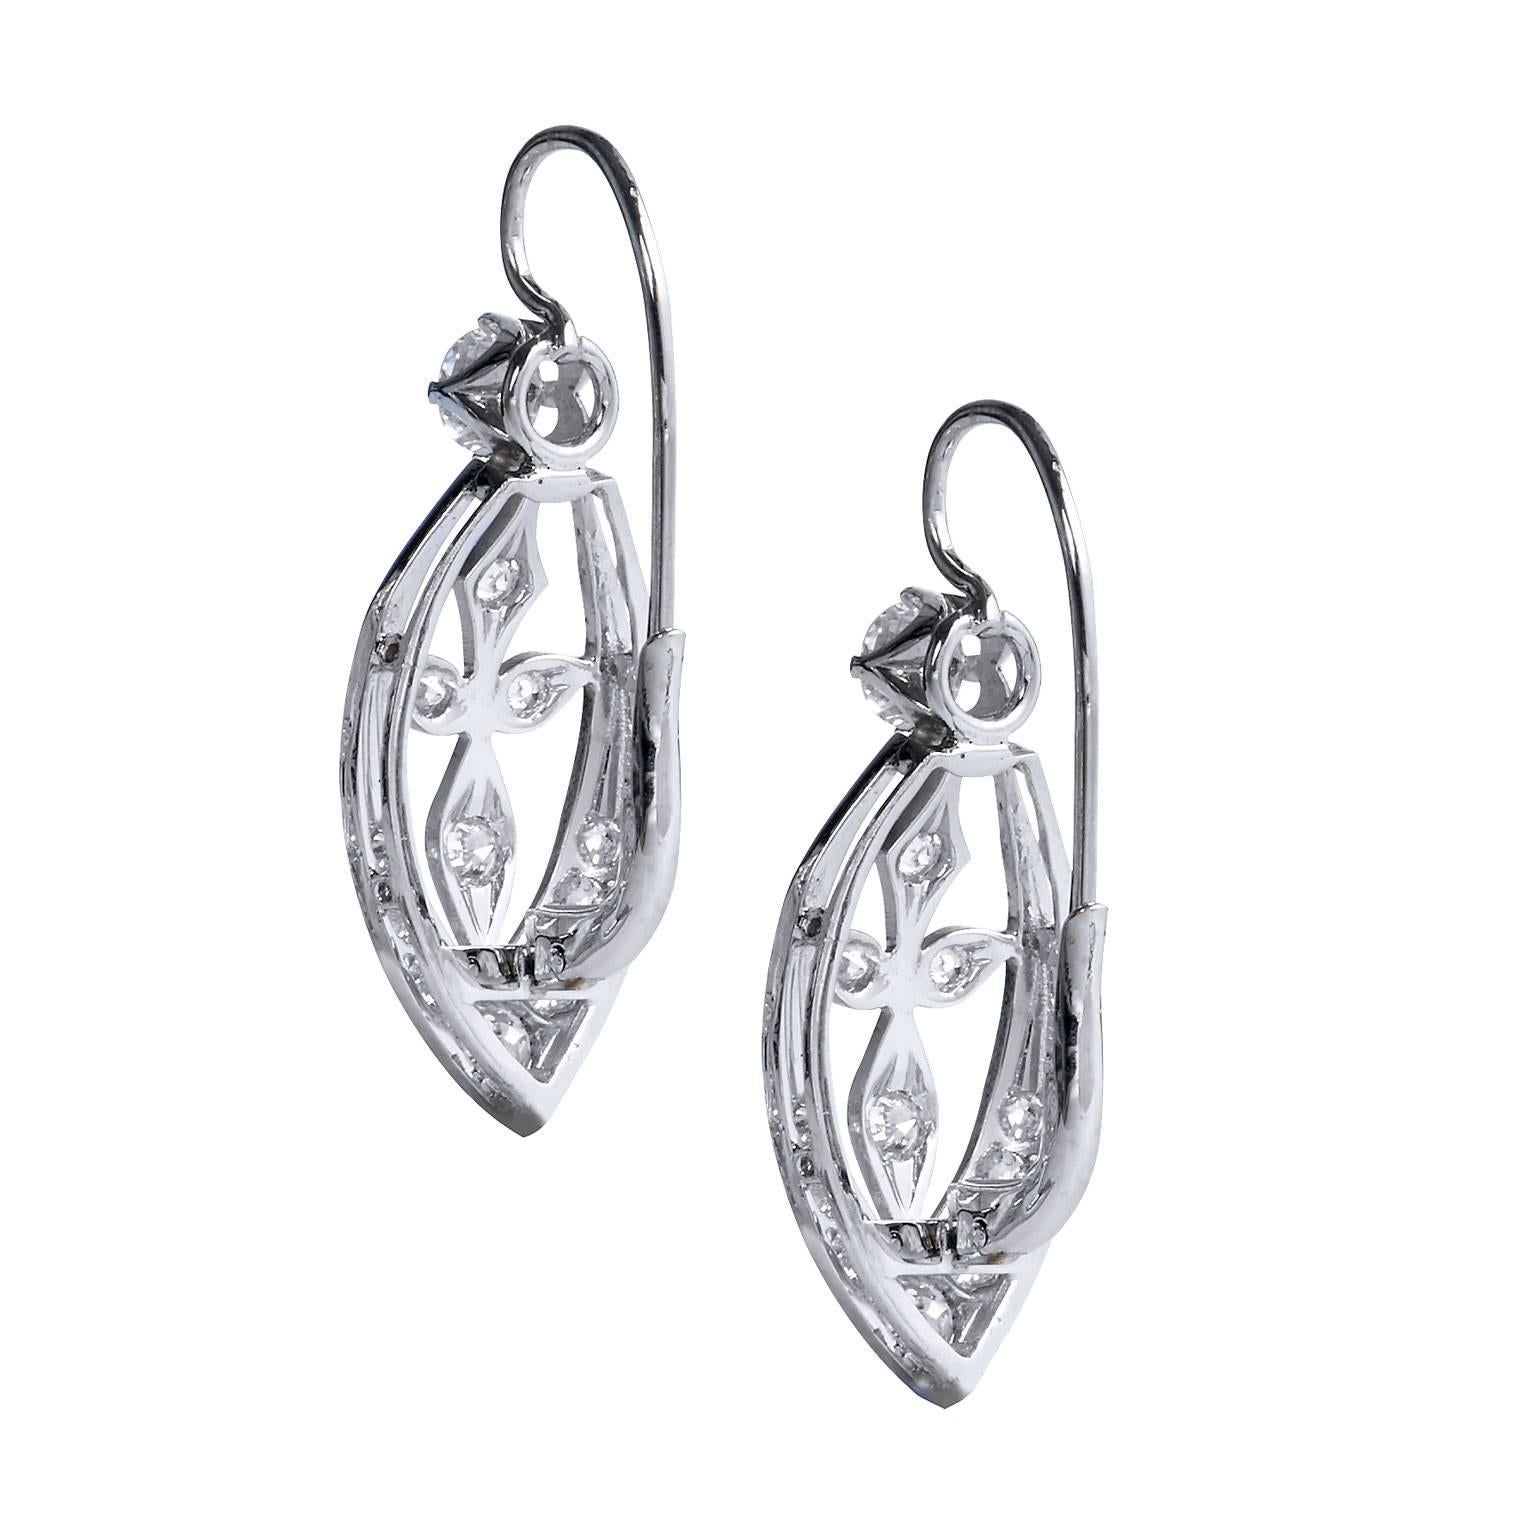 Art Deco 1.17 Carat Diamond 18 karat White Gold Lever Back Earrings

Delicate in appearance but bold in effect. These 18 karat white gold Art Deco lever back earrings feature a total of twenty-four pieces of diamonds weighing 1.17 carat (H/H/VS/SI).